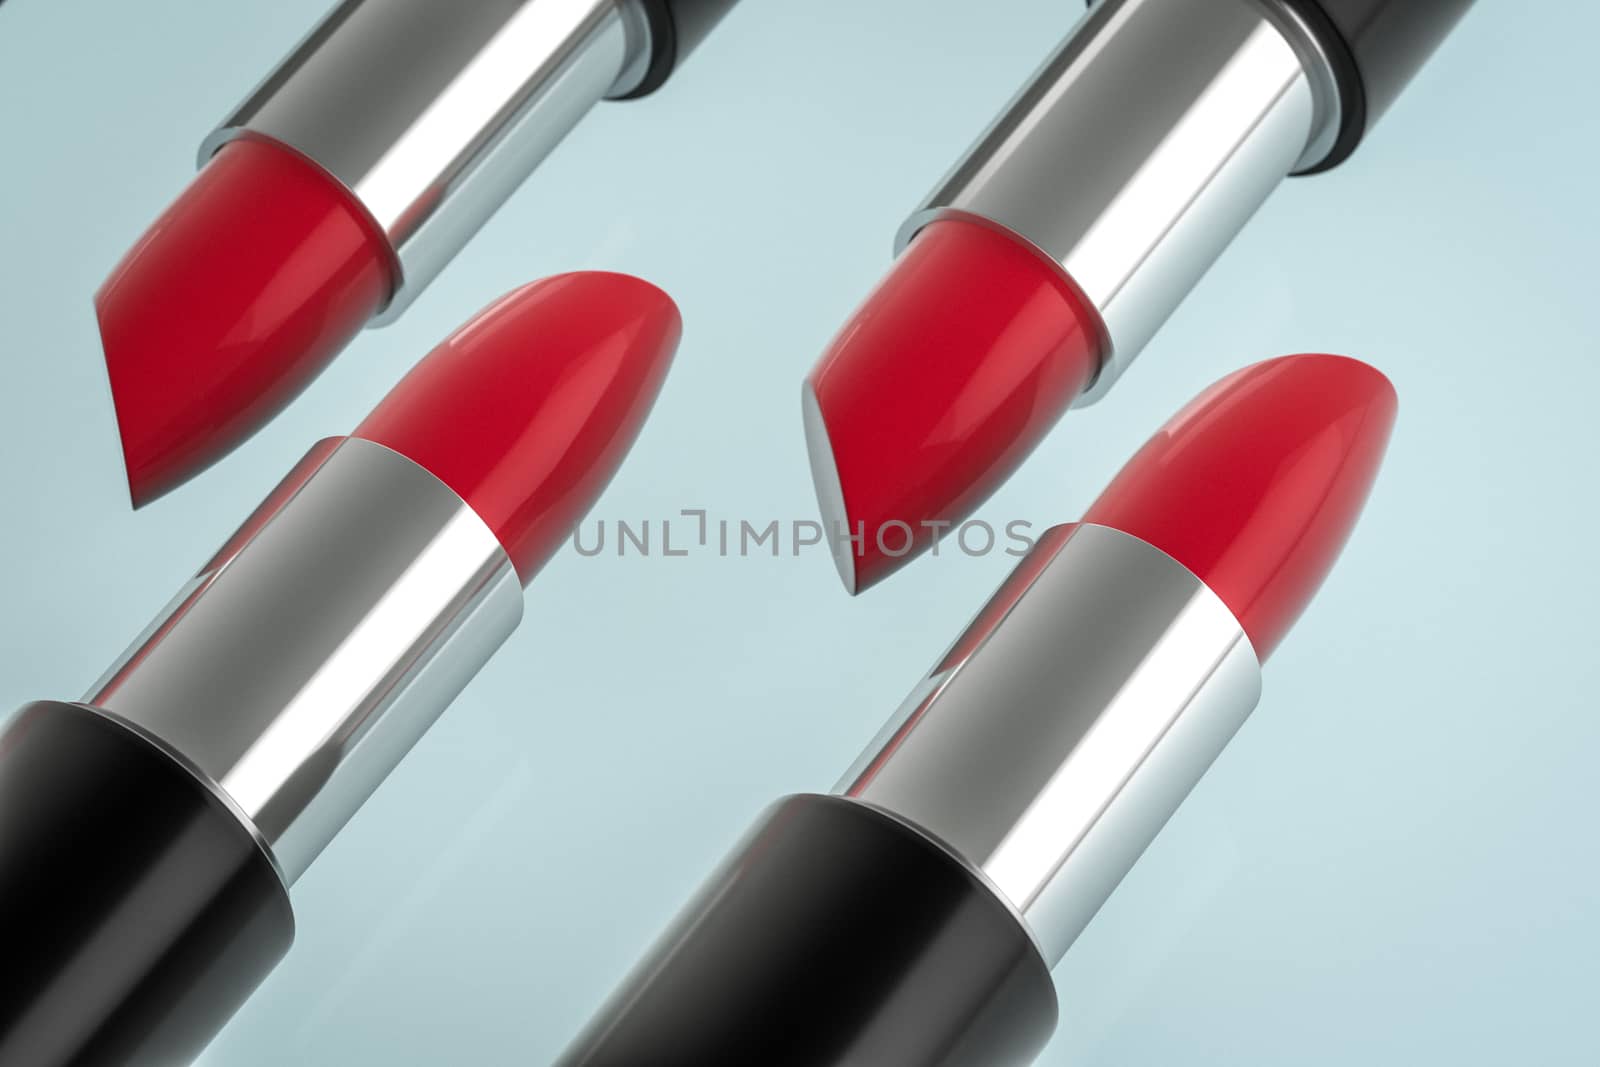 Lipstick with light color background, product photography, 3d rendering. by vinkfan